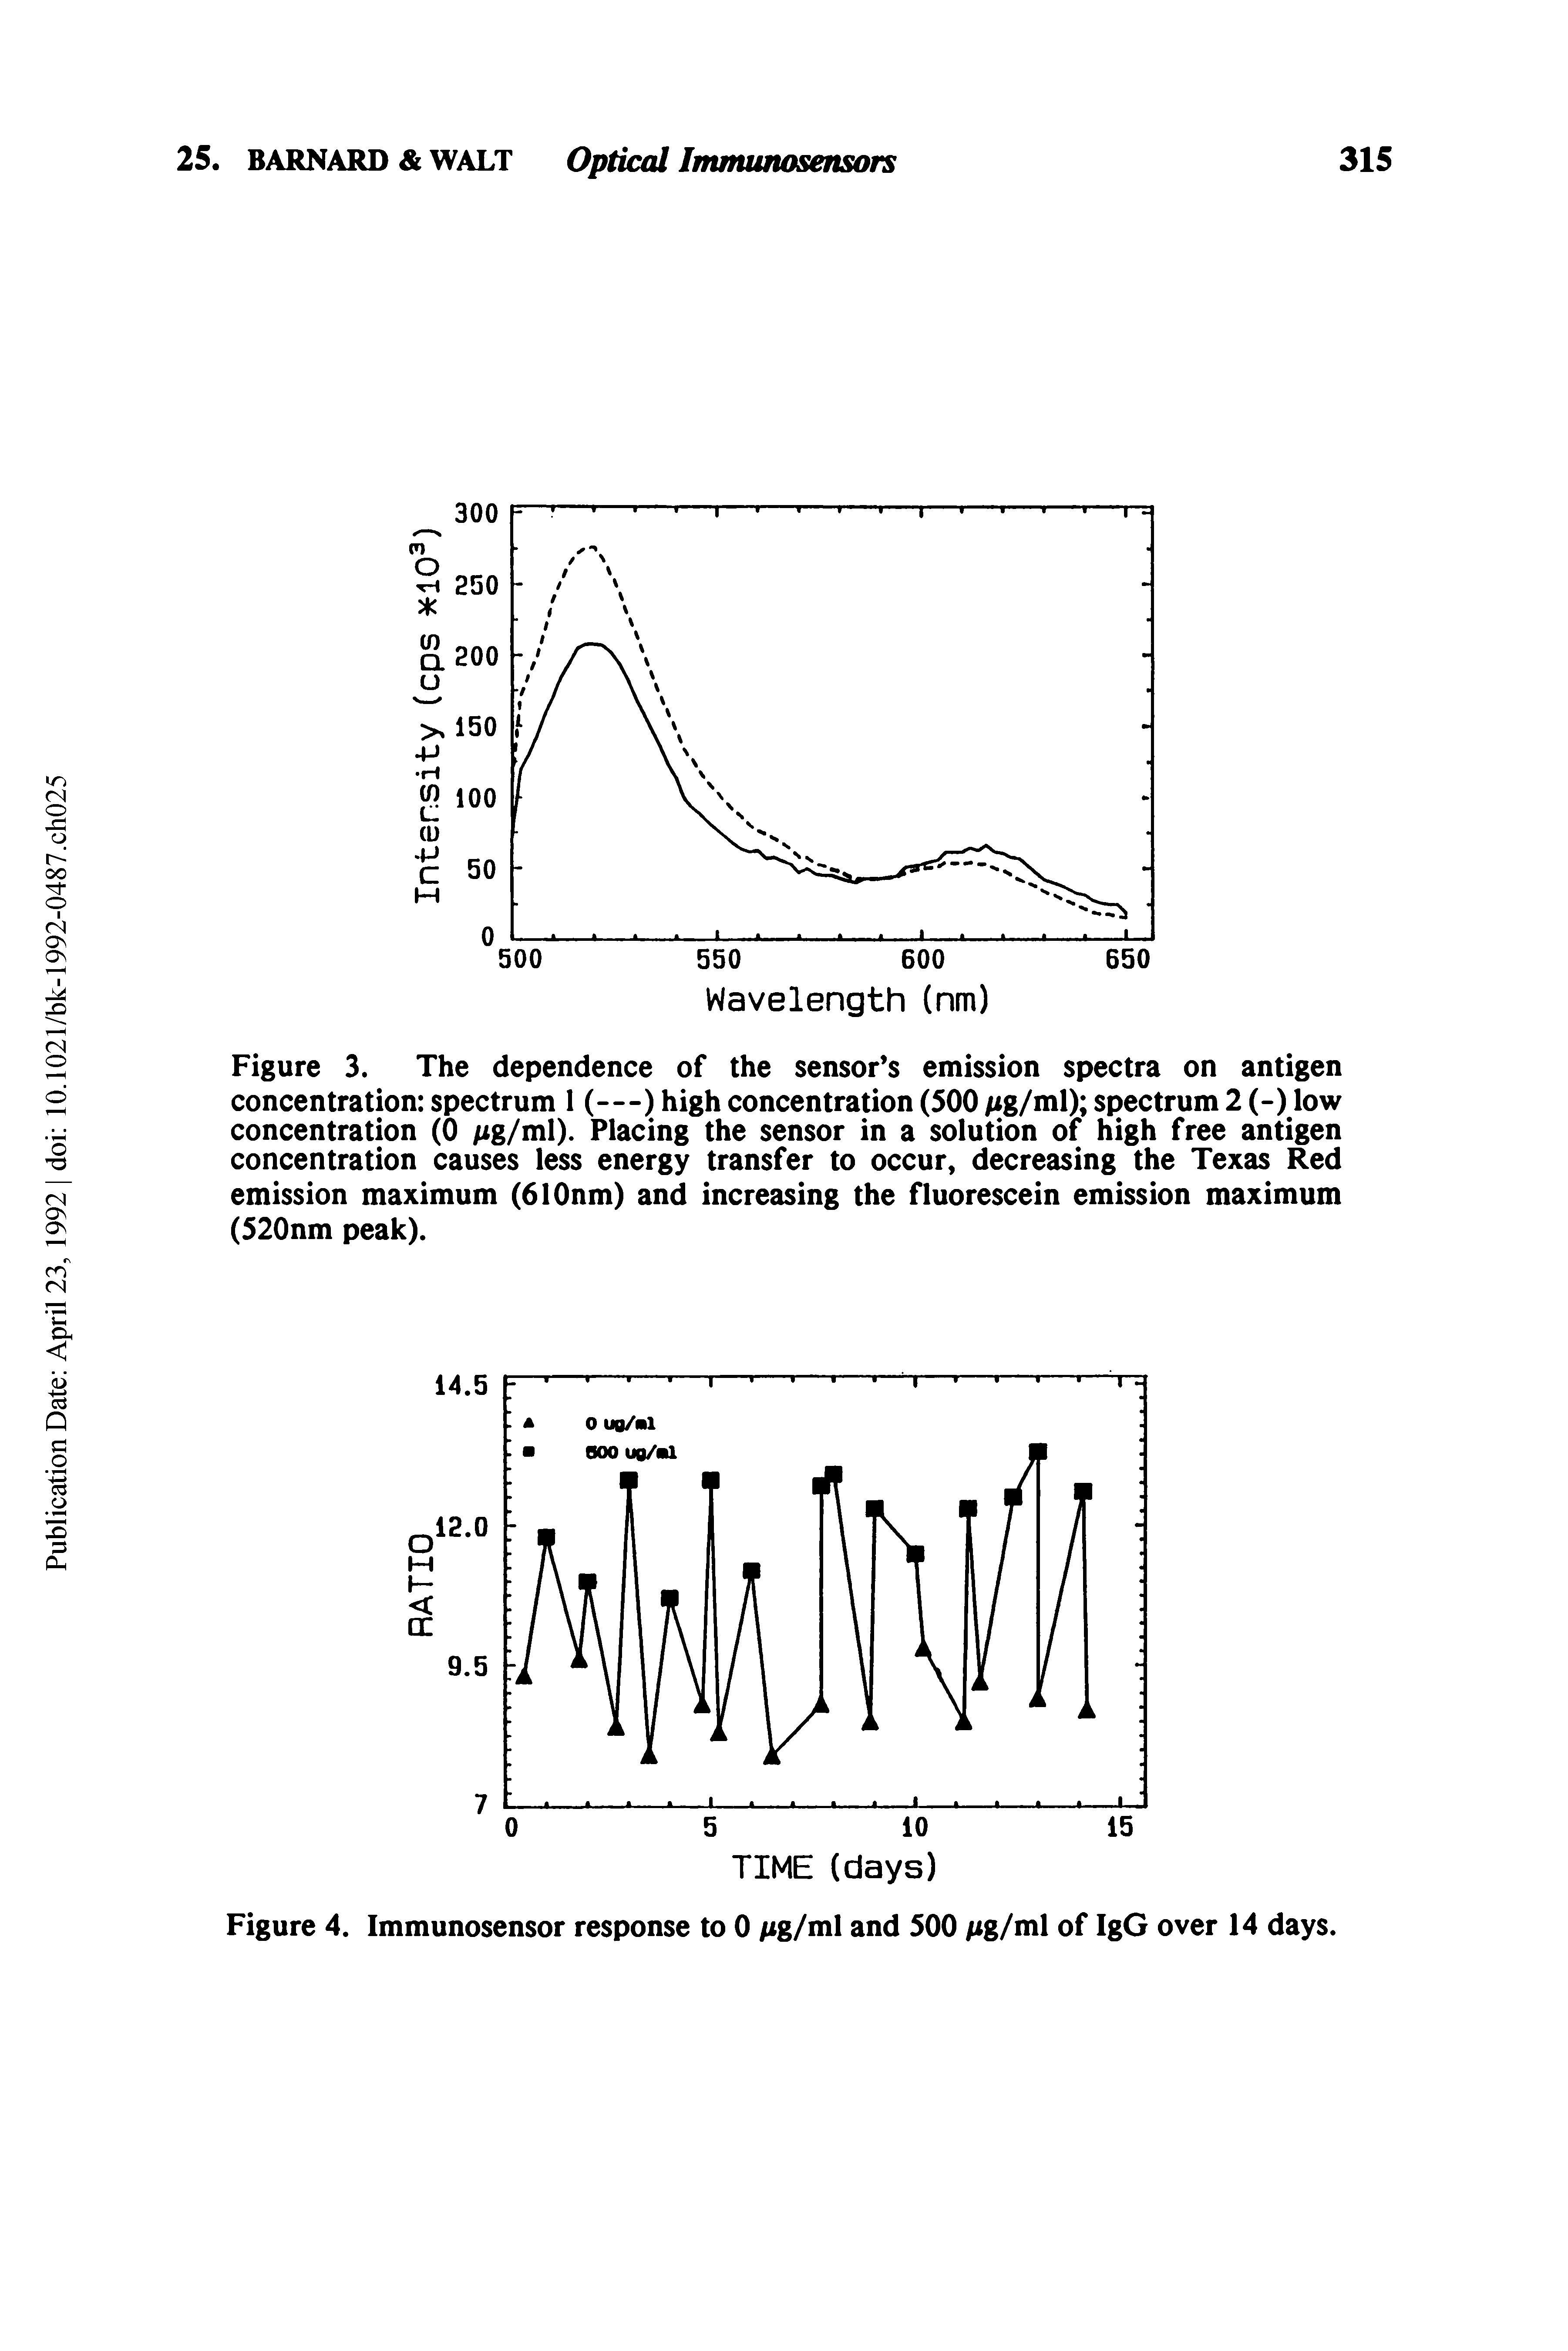 Figure 3. The dependence of the sensor s emission spectra on antigen concentration spectrum 1 (—) high concentration (500 /ig/ml) spectrum 2 (-) low concentration (0 /ig/ml). Placing the sensor in a solution of high free antigen concentration causes less energy transfer to occur, decreasing the Texas Red emission maximum (610nm) and increasing the fluorescein emission maximum (520nm peak).